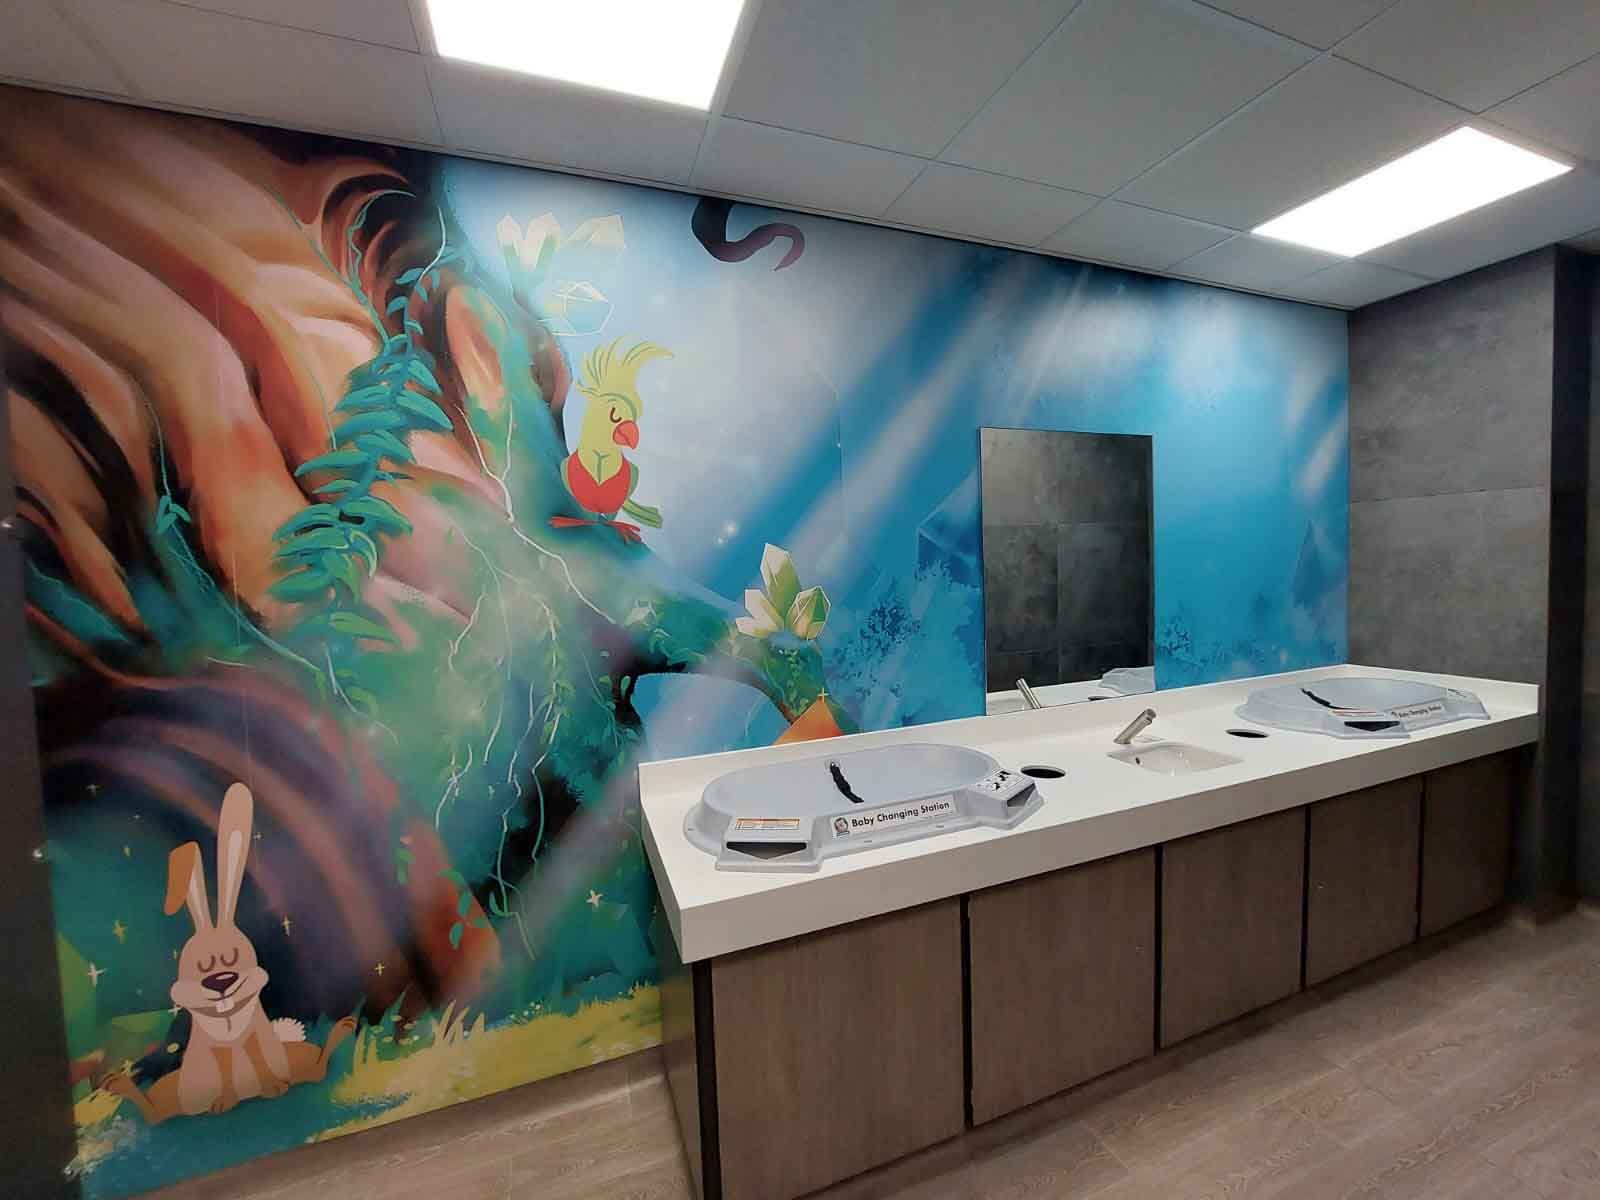  washroom with baby changing unit and wall mural 